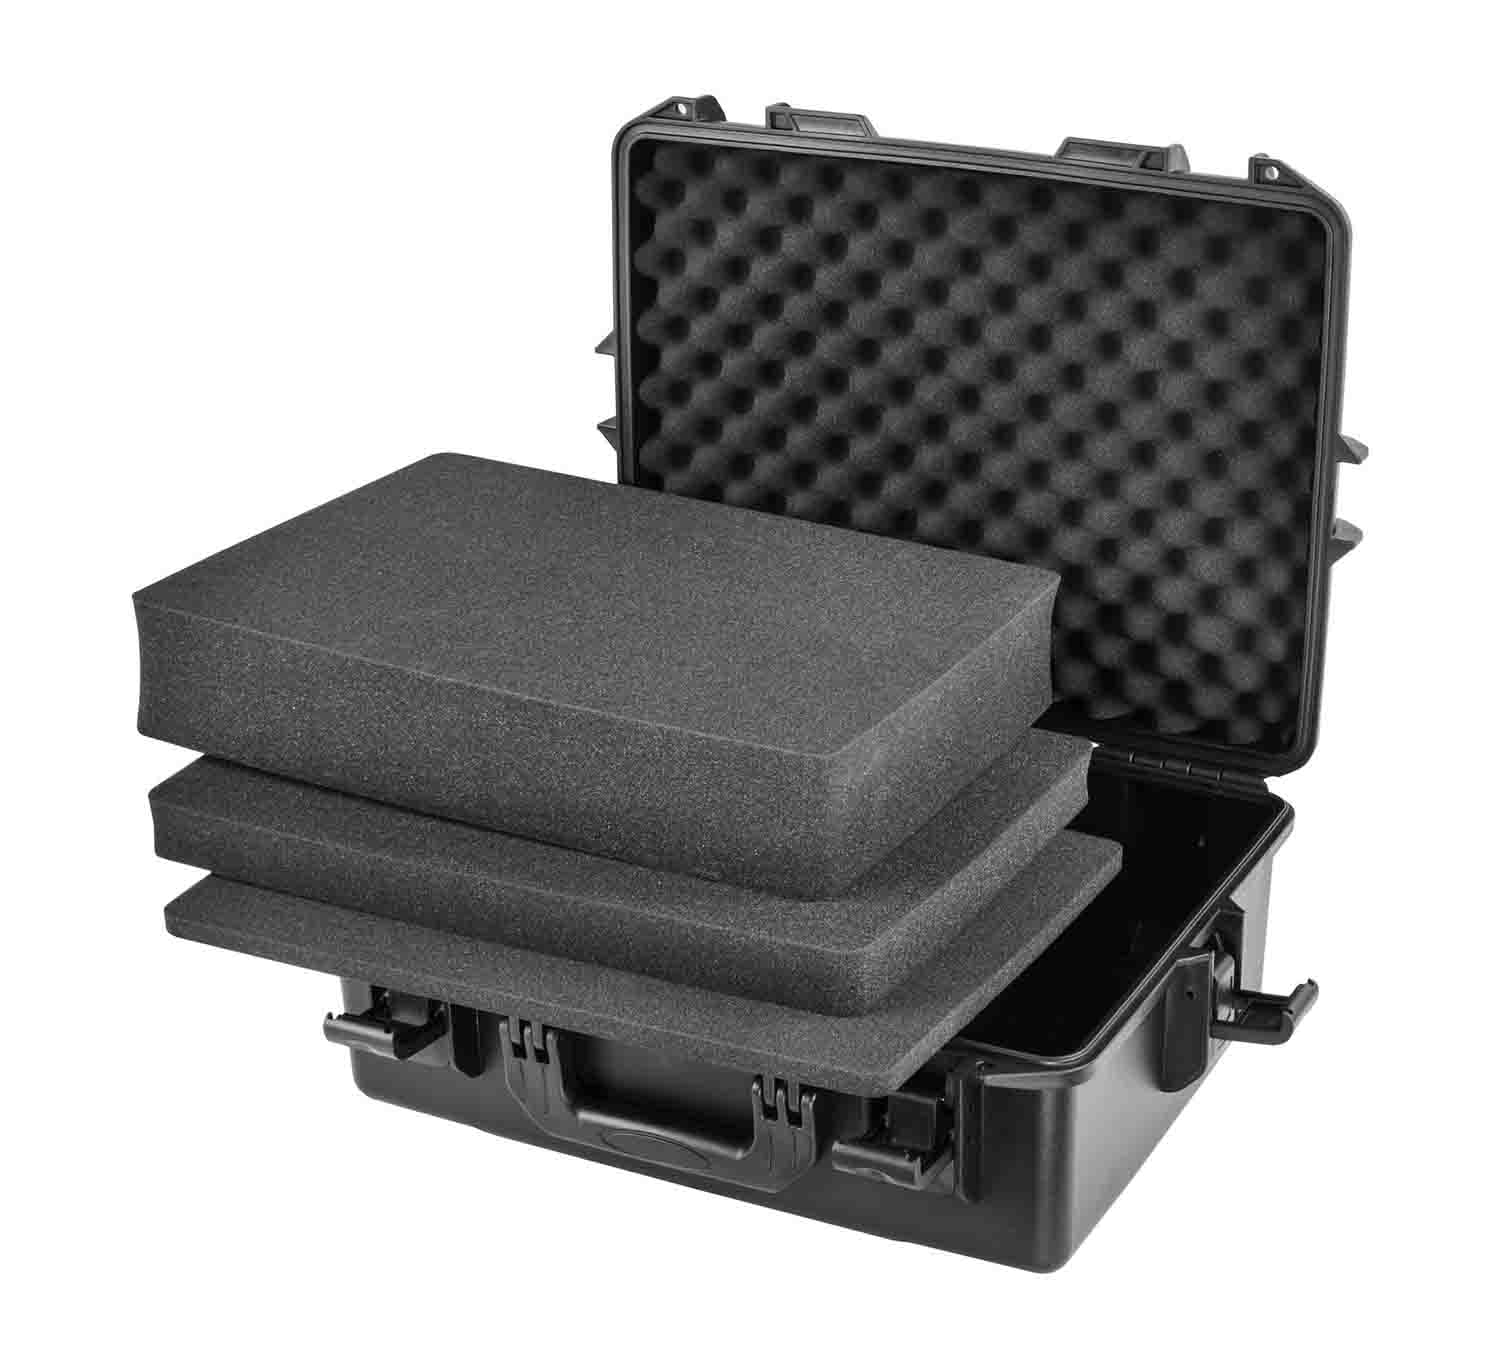 Odyssey VU191407 Bottom Interior with Pluck Foams Injection-Molded Utility Case - 19.25″ x 14″ x 5.5″ - Hollywood DJ